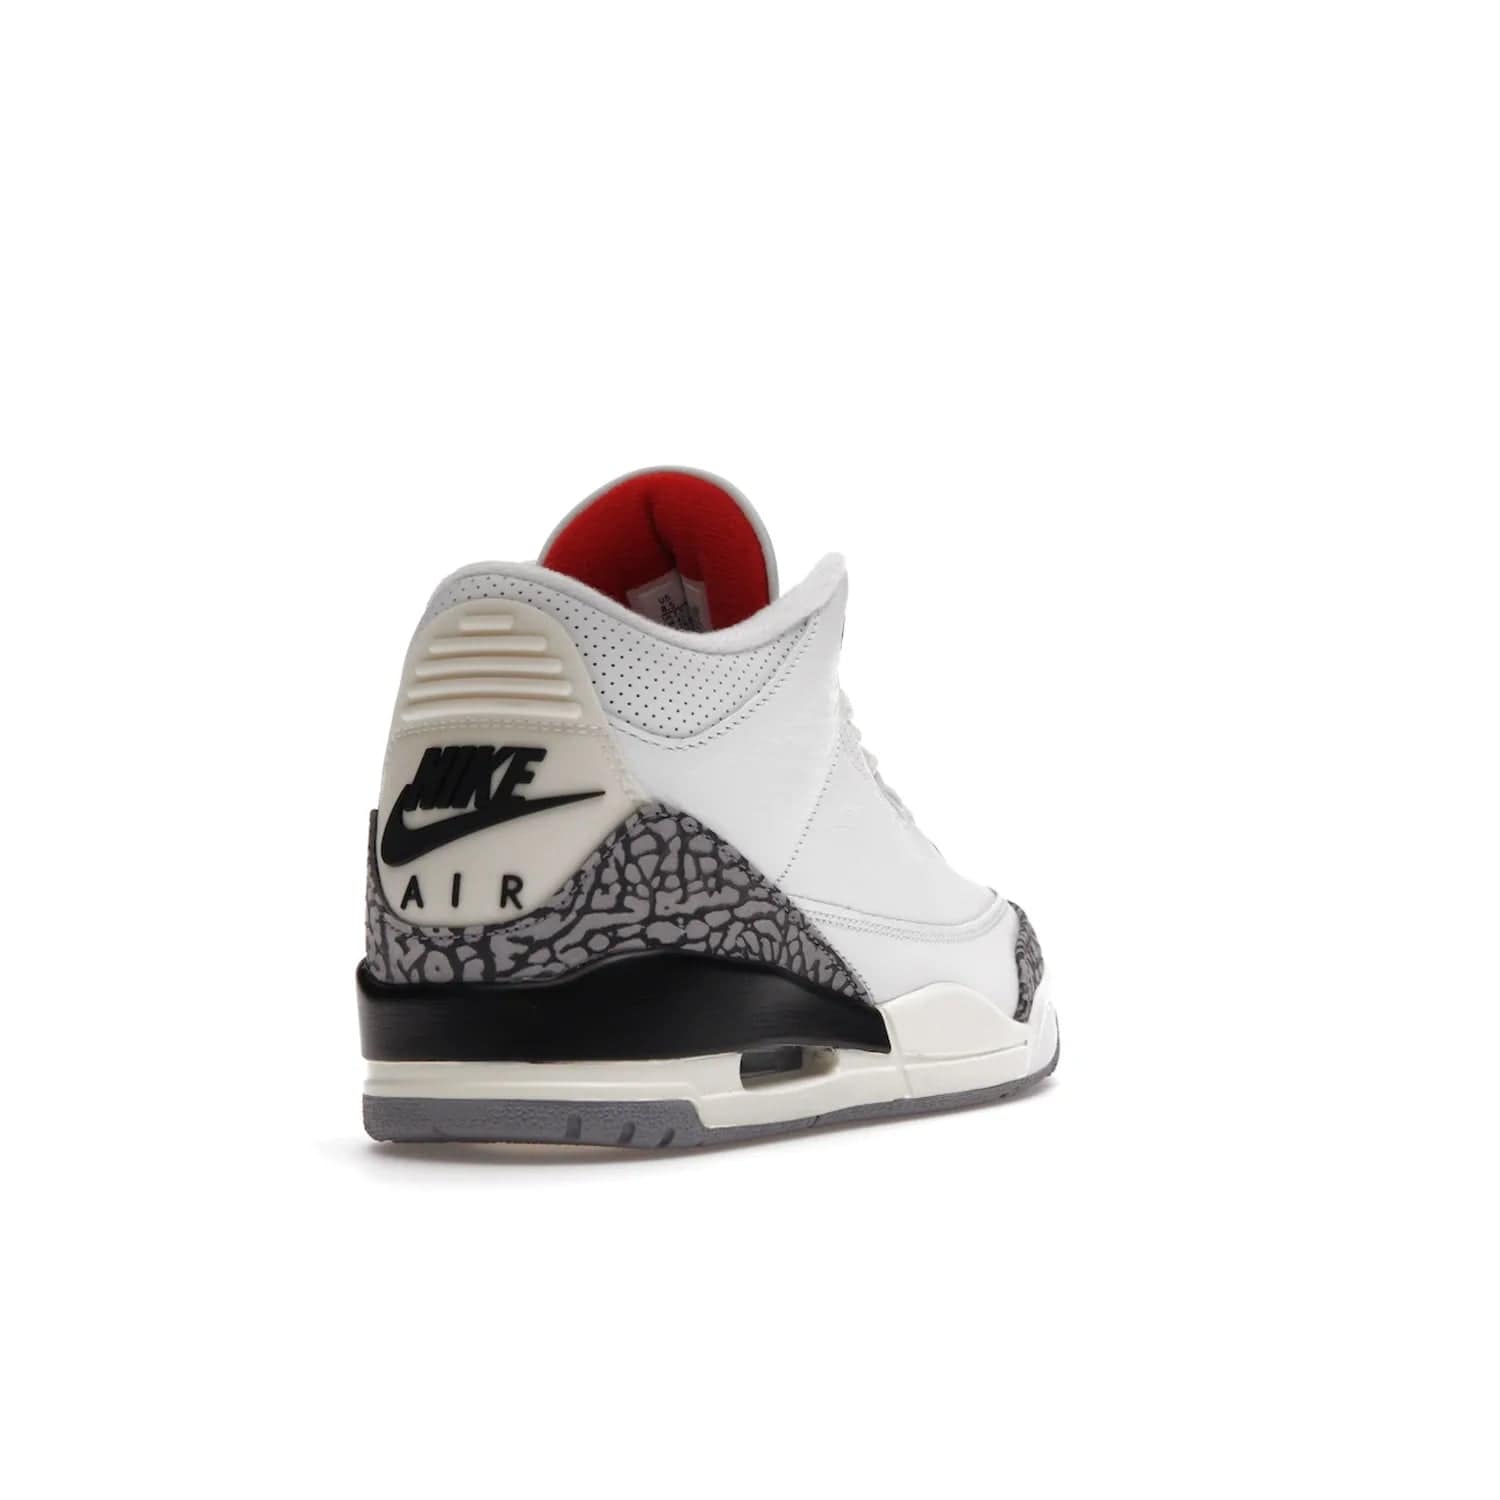 Jordan 3 Retro White Cement Reimagined - Image 31 - Only at www.BallersClubKickz.com - The Reimagined Air Jordan 3 Retro in a Summit White/Fire Red/Black/Cement Grey colorway is launching on March 11, 2023. Featuring a white leather upper, off-white midsoles and heel tabs, this vintage-look sneaker is a must-have.